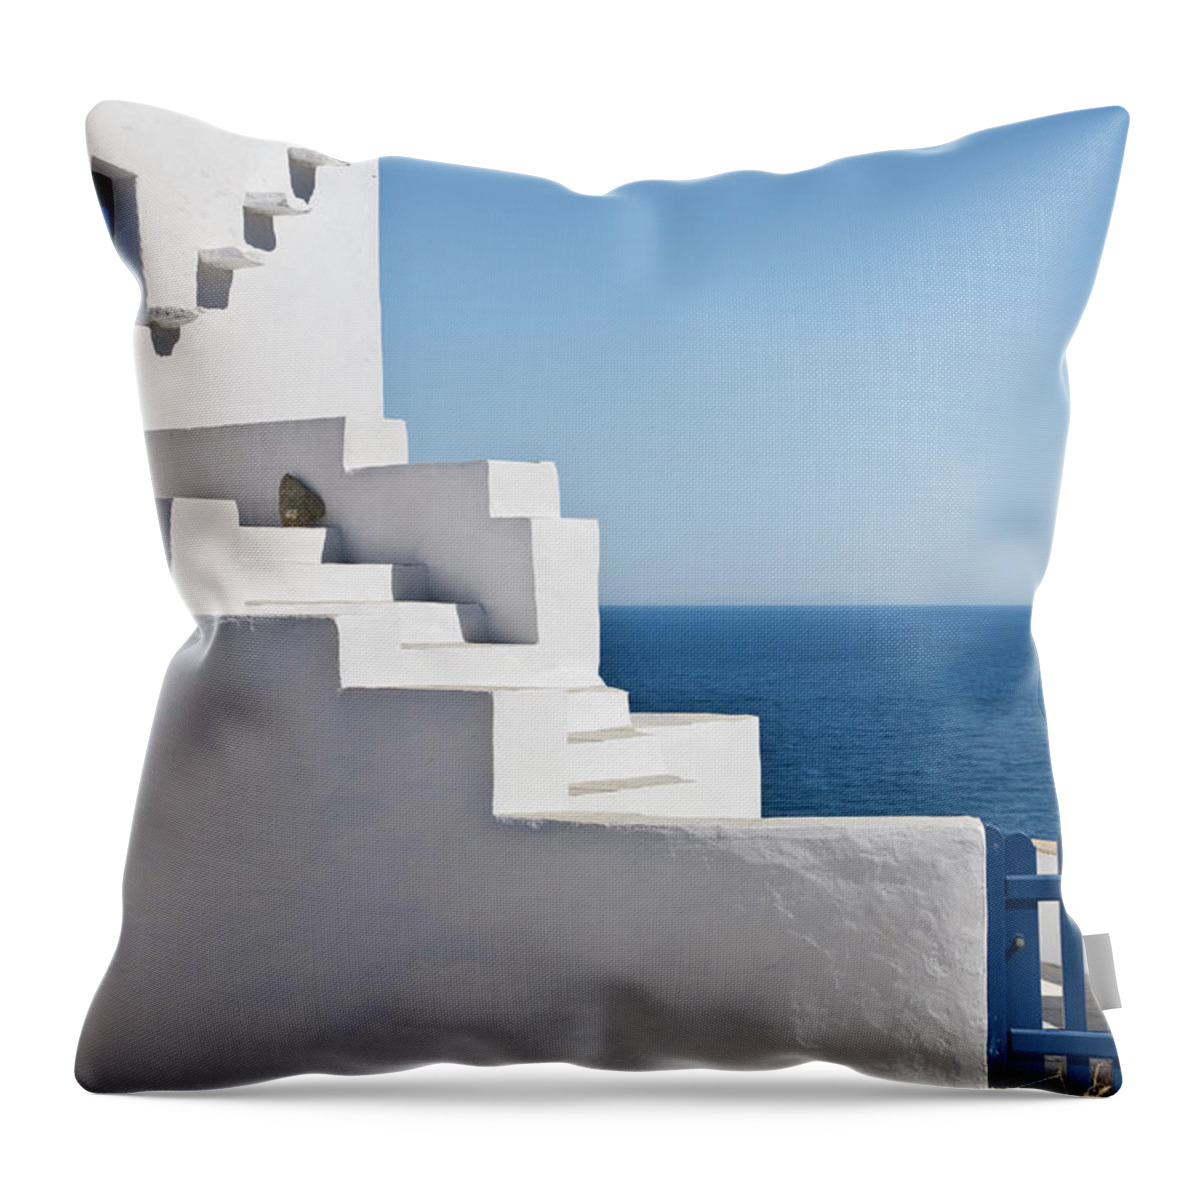 Tranquility Throw Pillow featuring the photograph Whitewashed House In Greece by Jpkimages